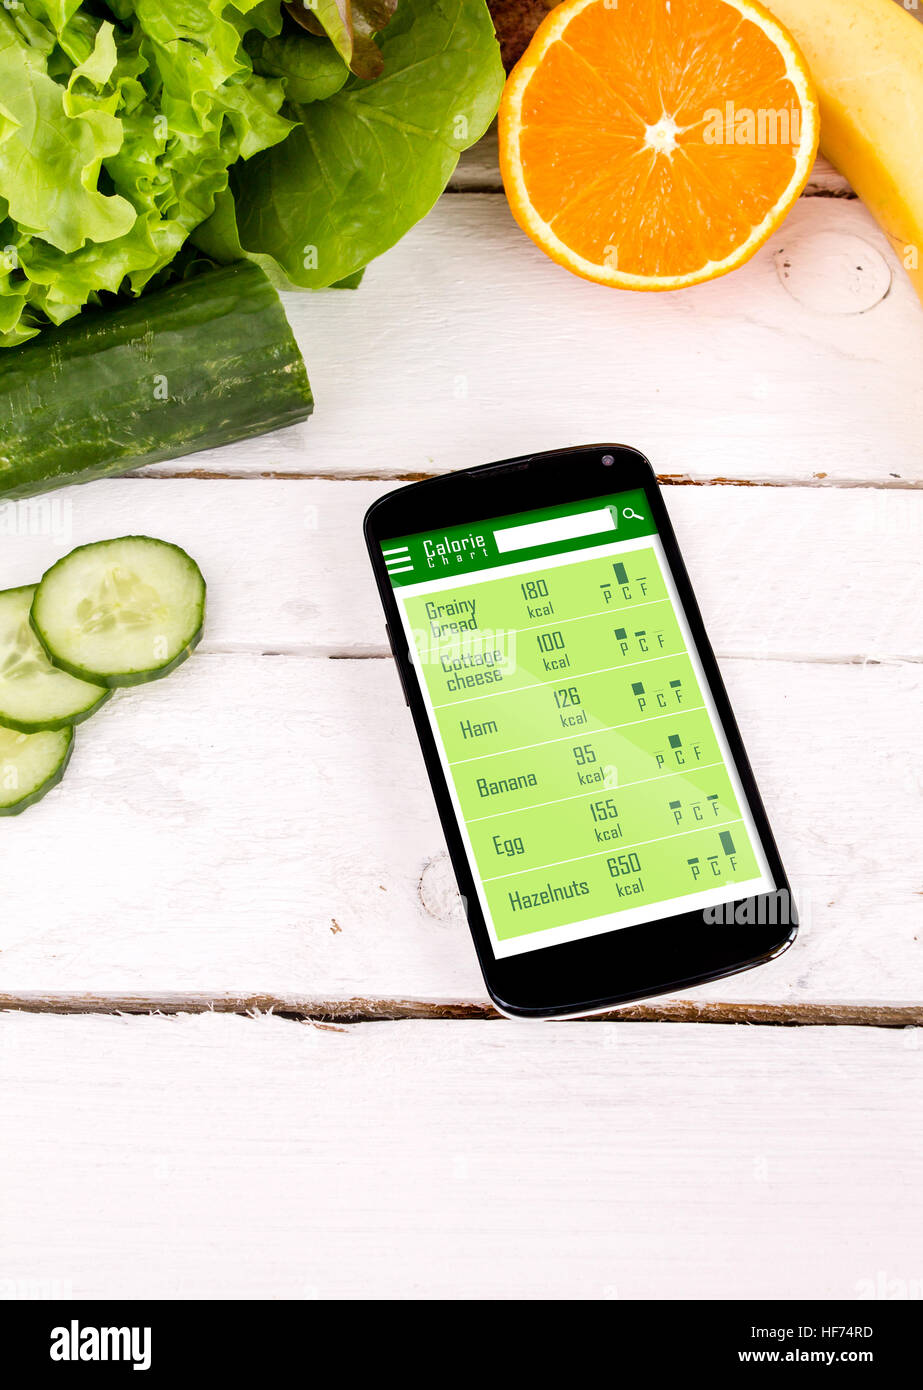 Counting calories in smartphone. Concept of app for healthcare Stock Photo